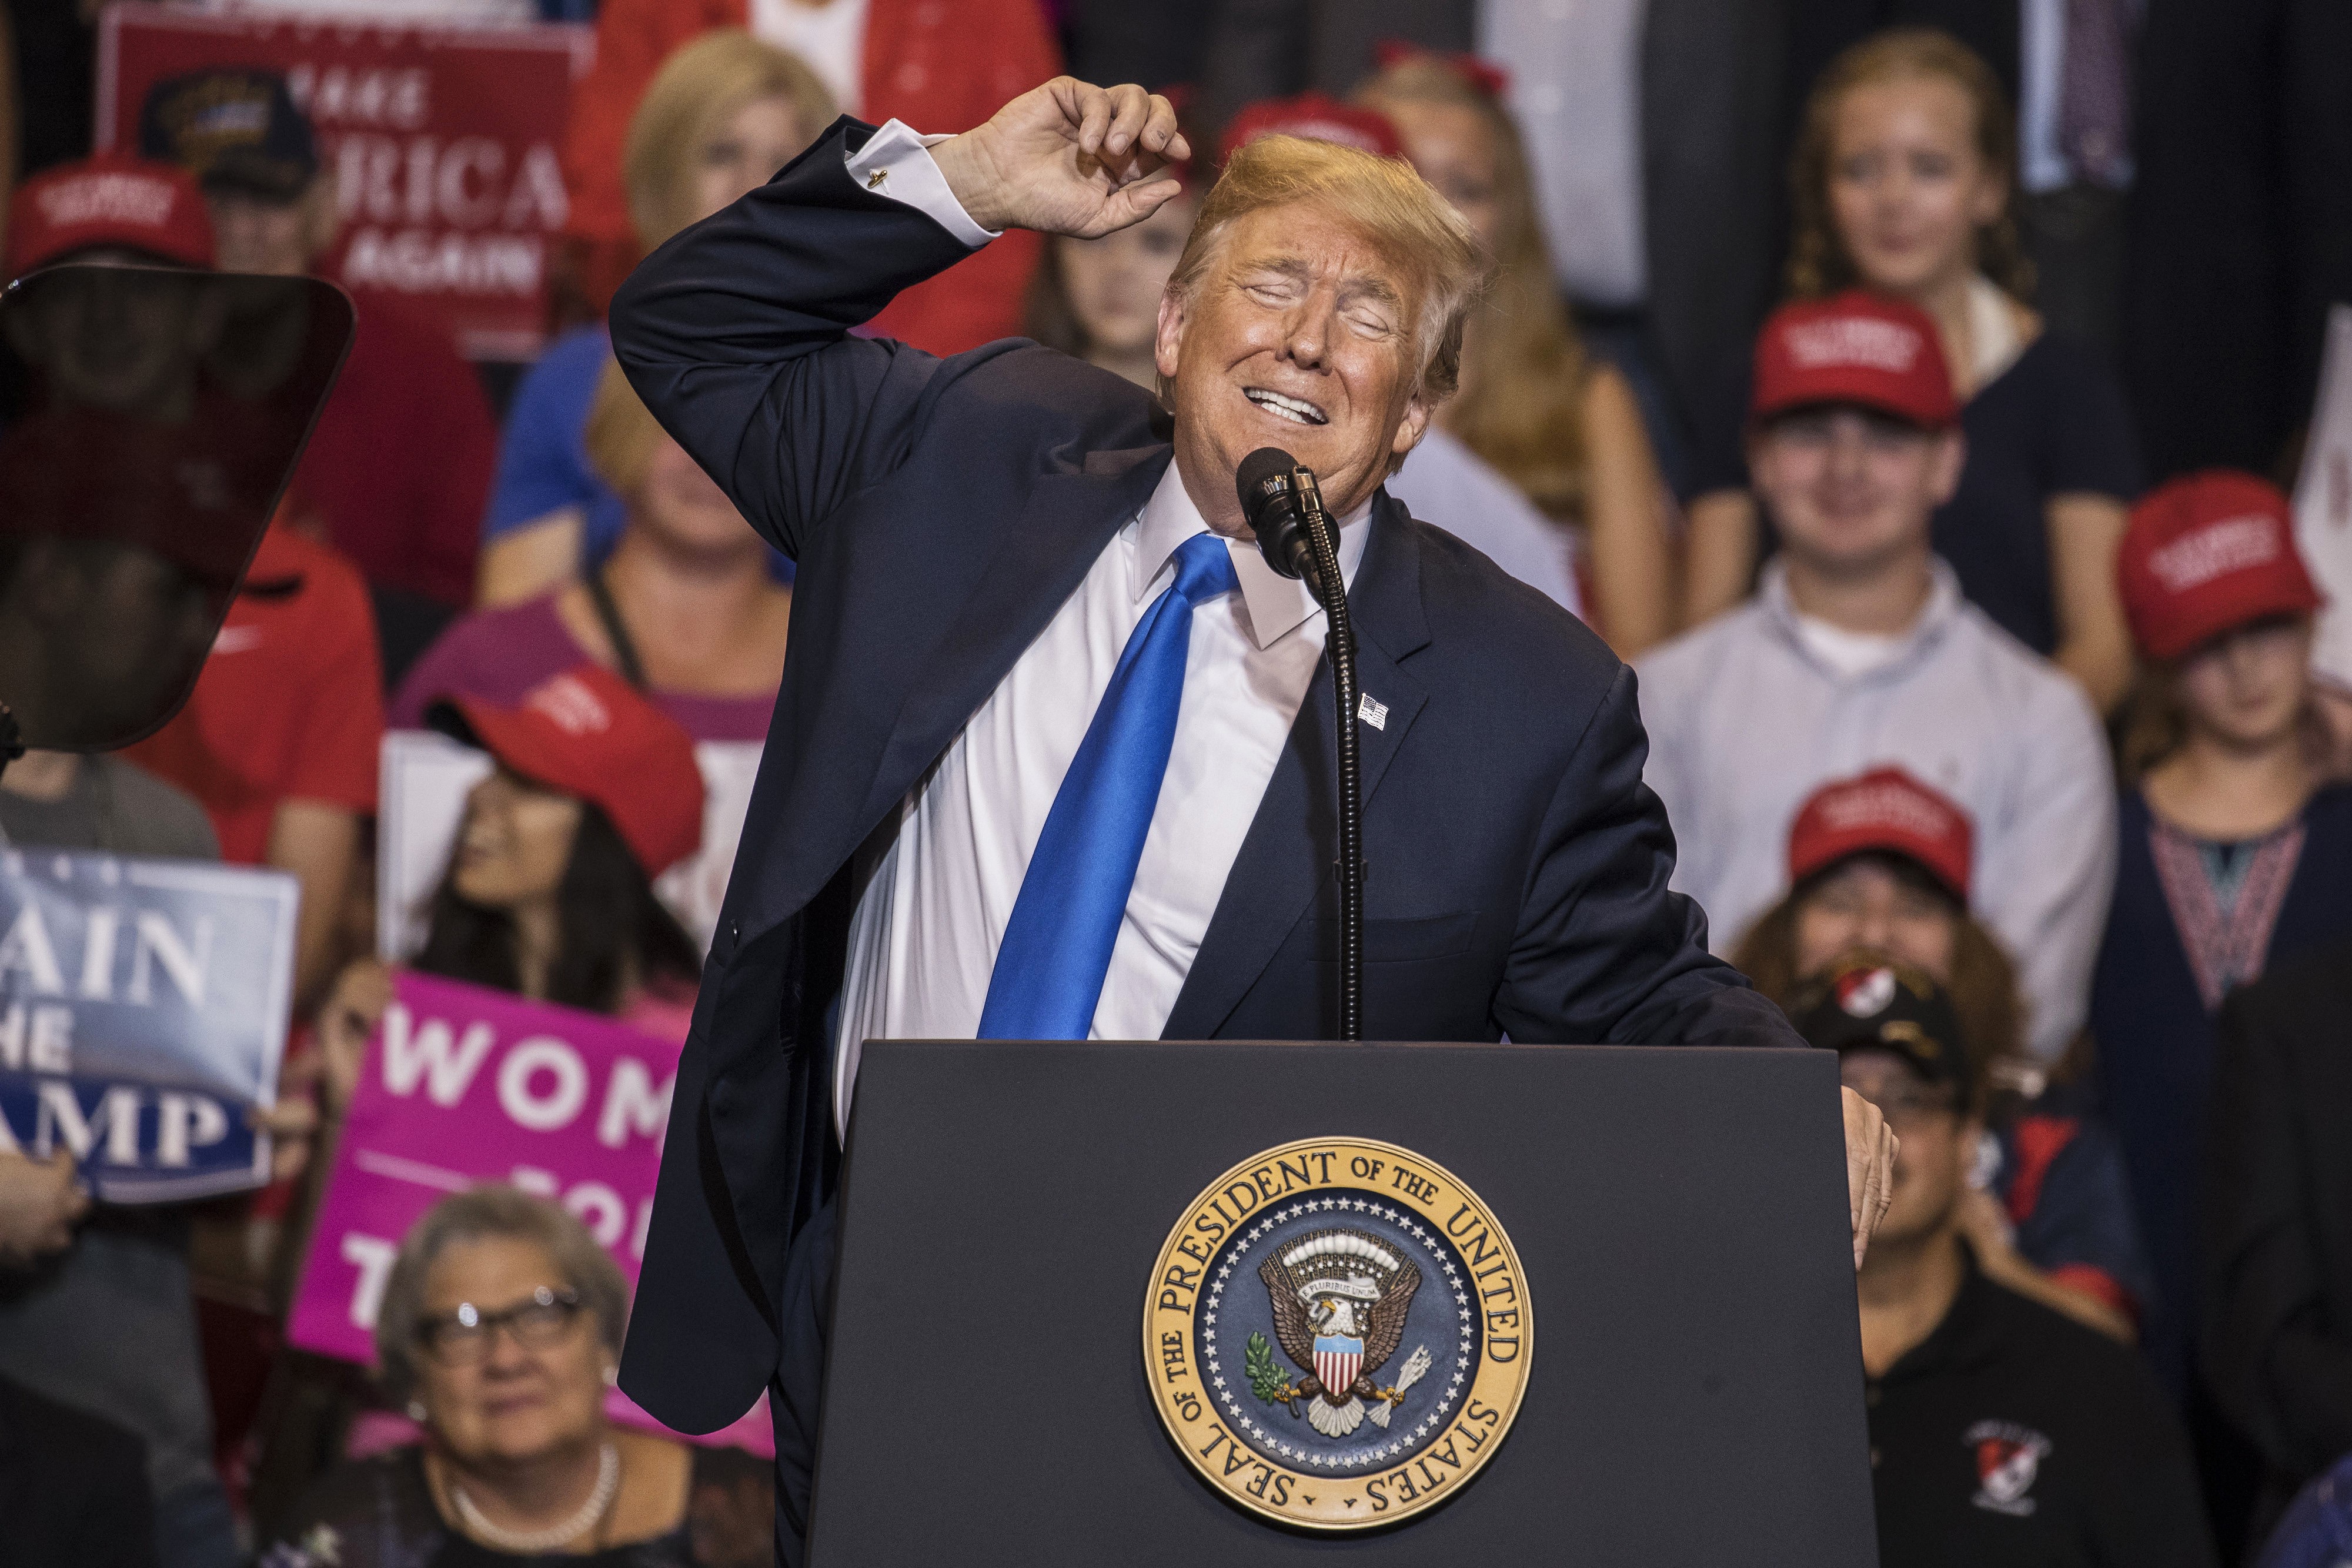 US President Donald Trump speaks during a rally in Wilkes-Barre, Pennsylvania on August 2. Trump tweeted recently that Pennsylvania has to love him because of what his policies have done for the steel industry. Photo: Bloomberg